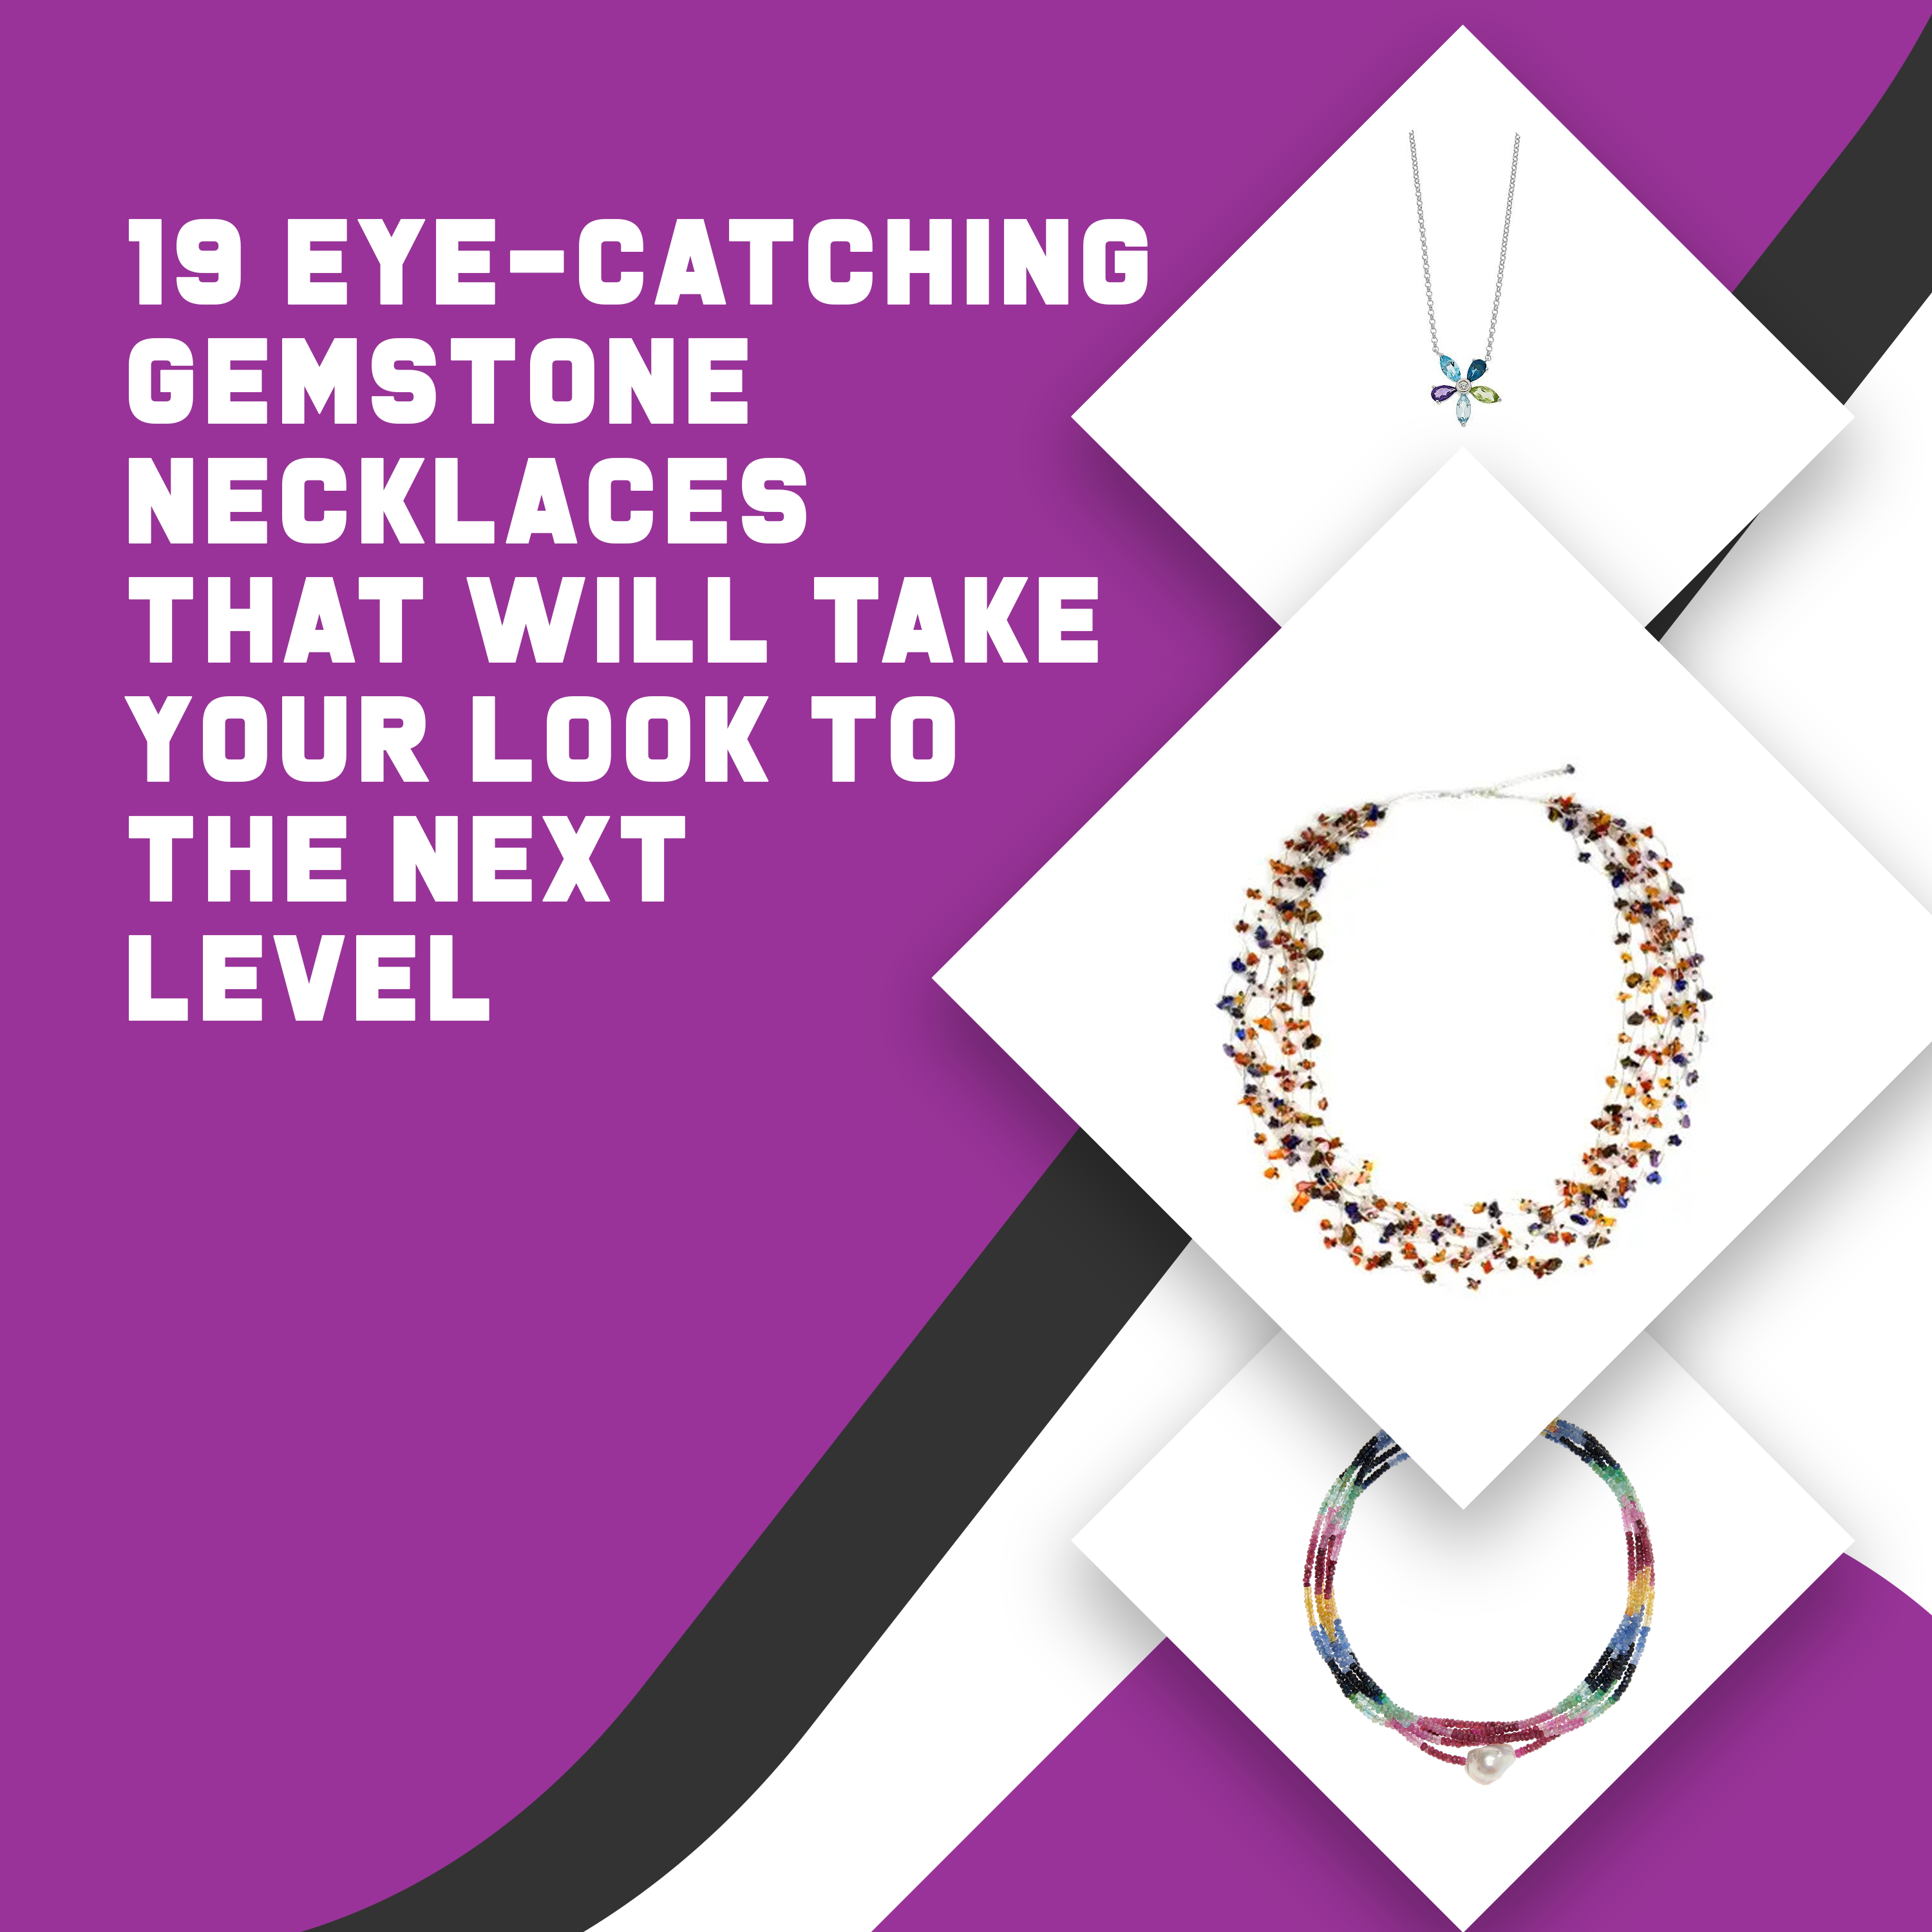 19 Eye-Catching Gemstone Necklaces That Will Take Your Look to the Next Level